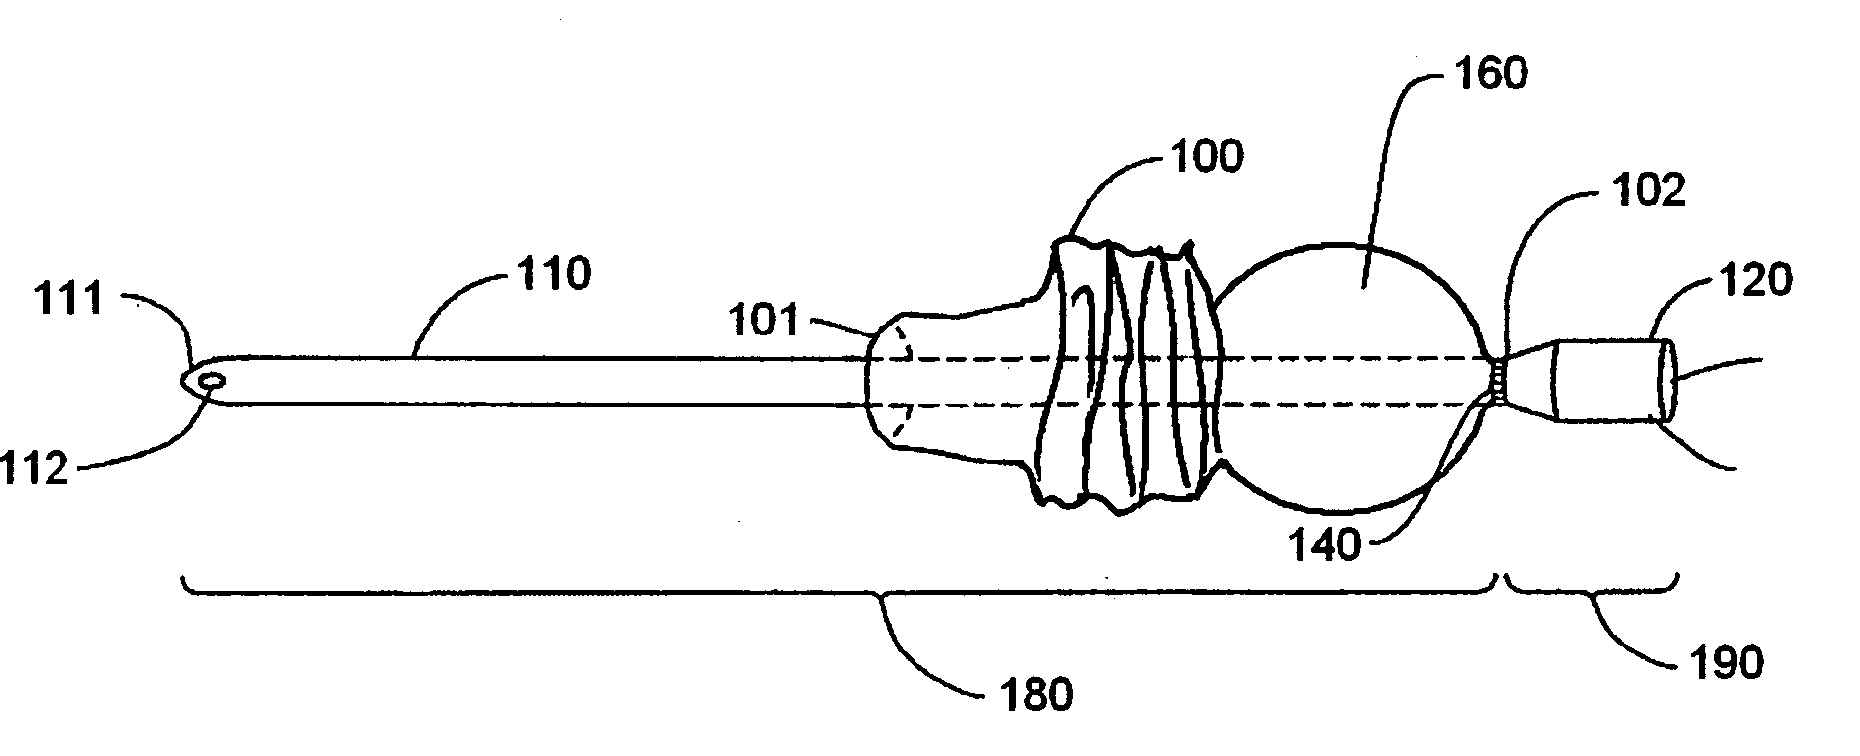 Devices and methods for catheterization